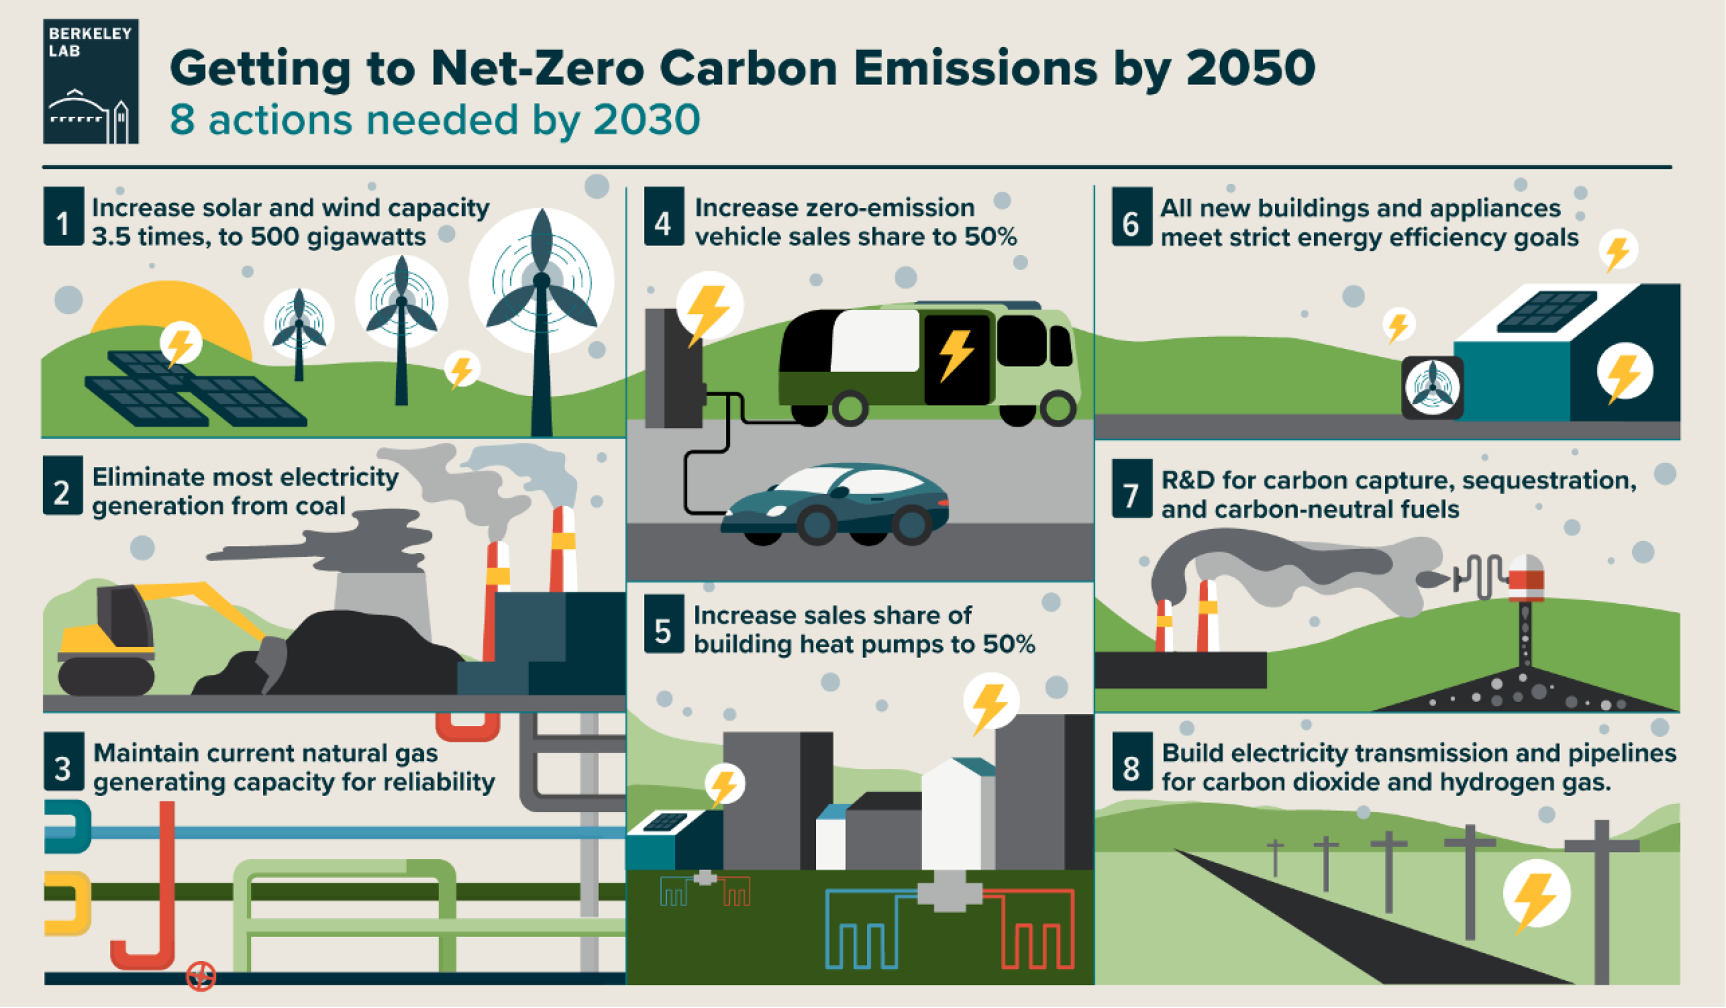 Getting to net zero carbon emissions by 2050